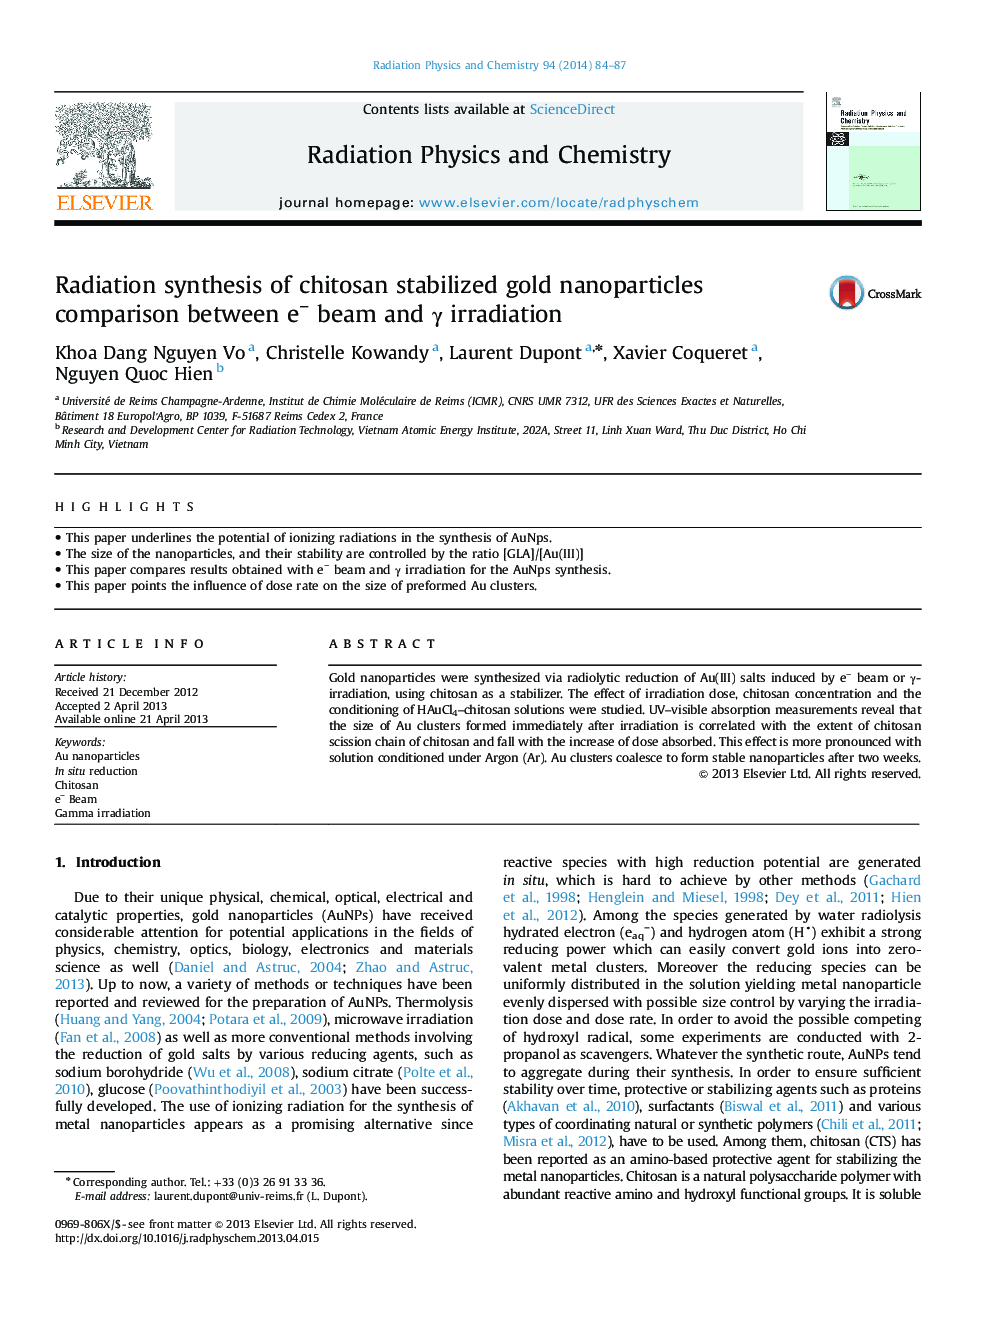 Radiation synthesis of chitosan stabilized gold nanoparticles comparison between e− beam and γ irradiation